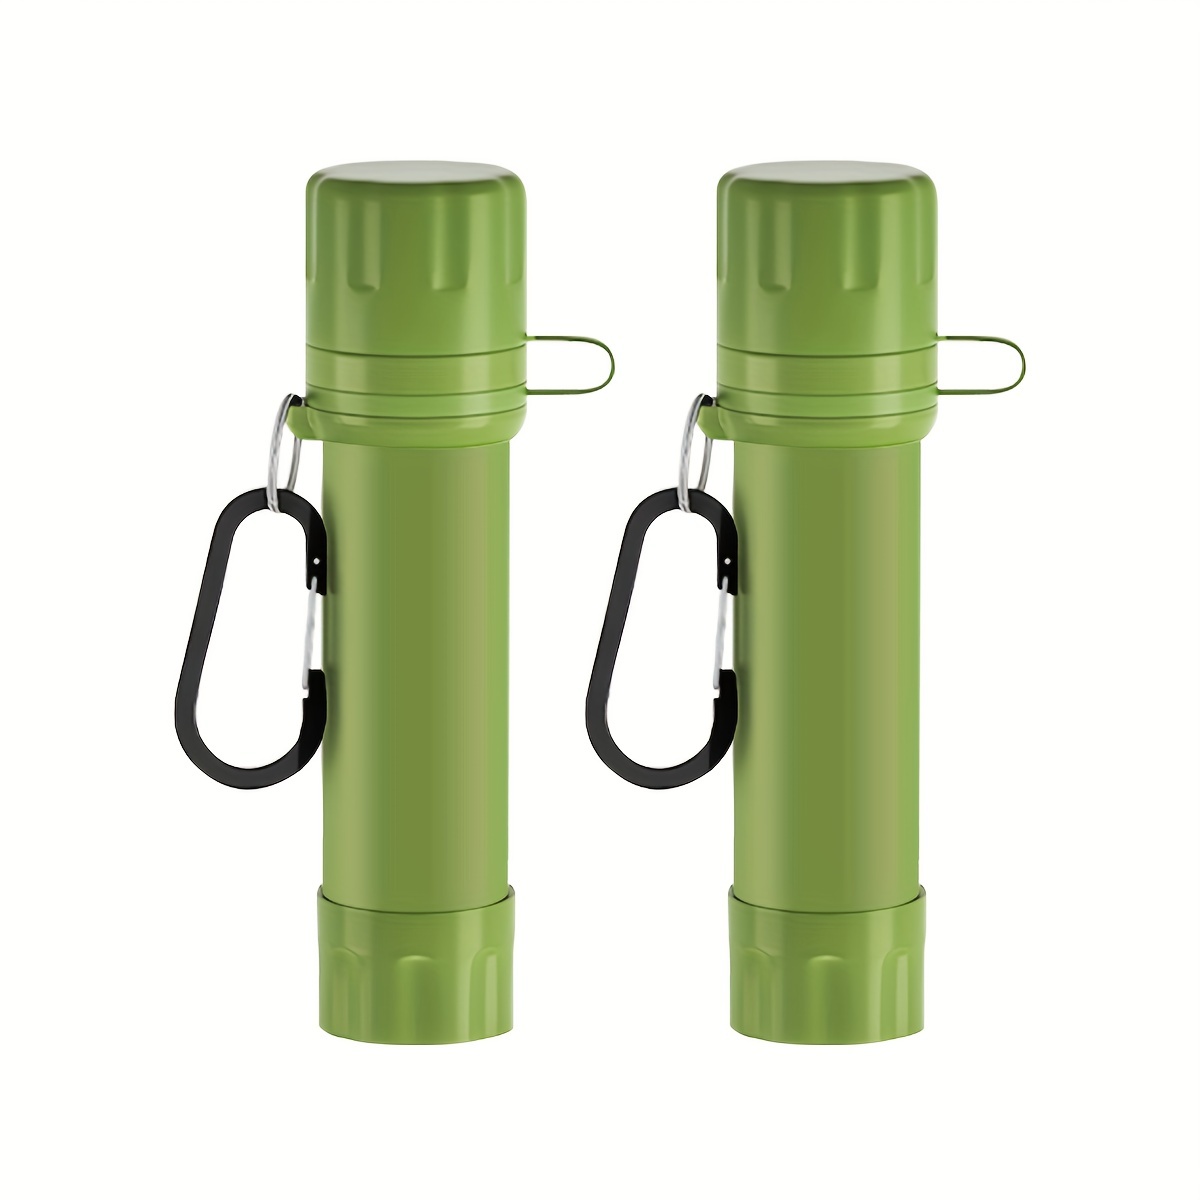 Customized Portable Outdoor Integrated Filtered Water Purifier